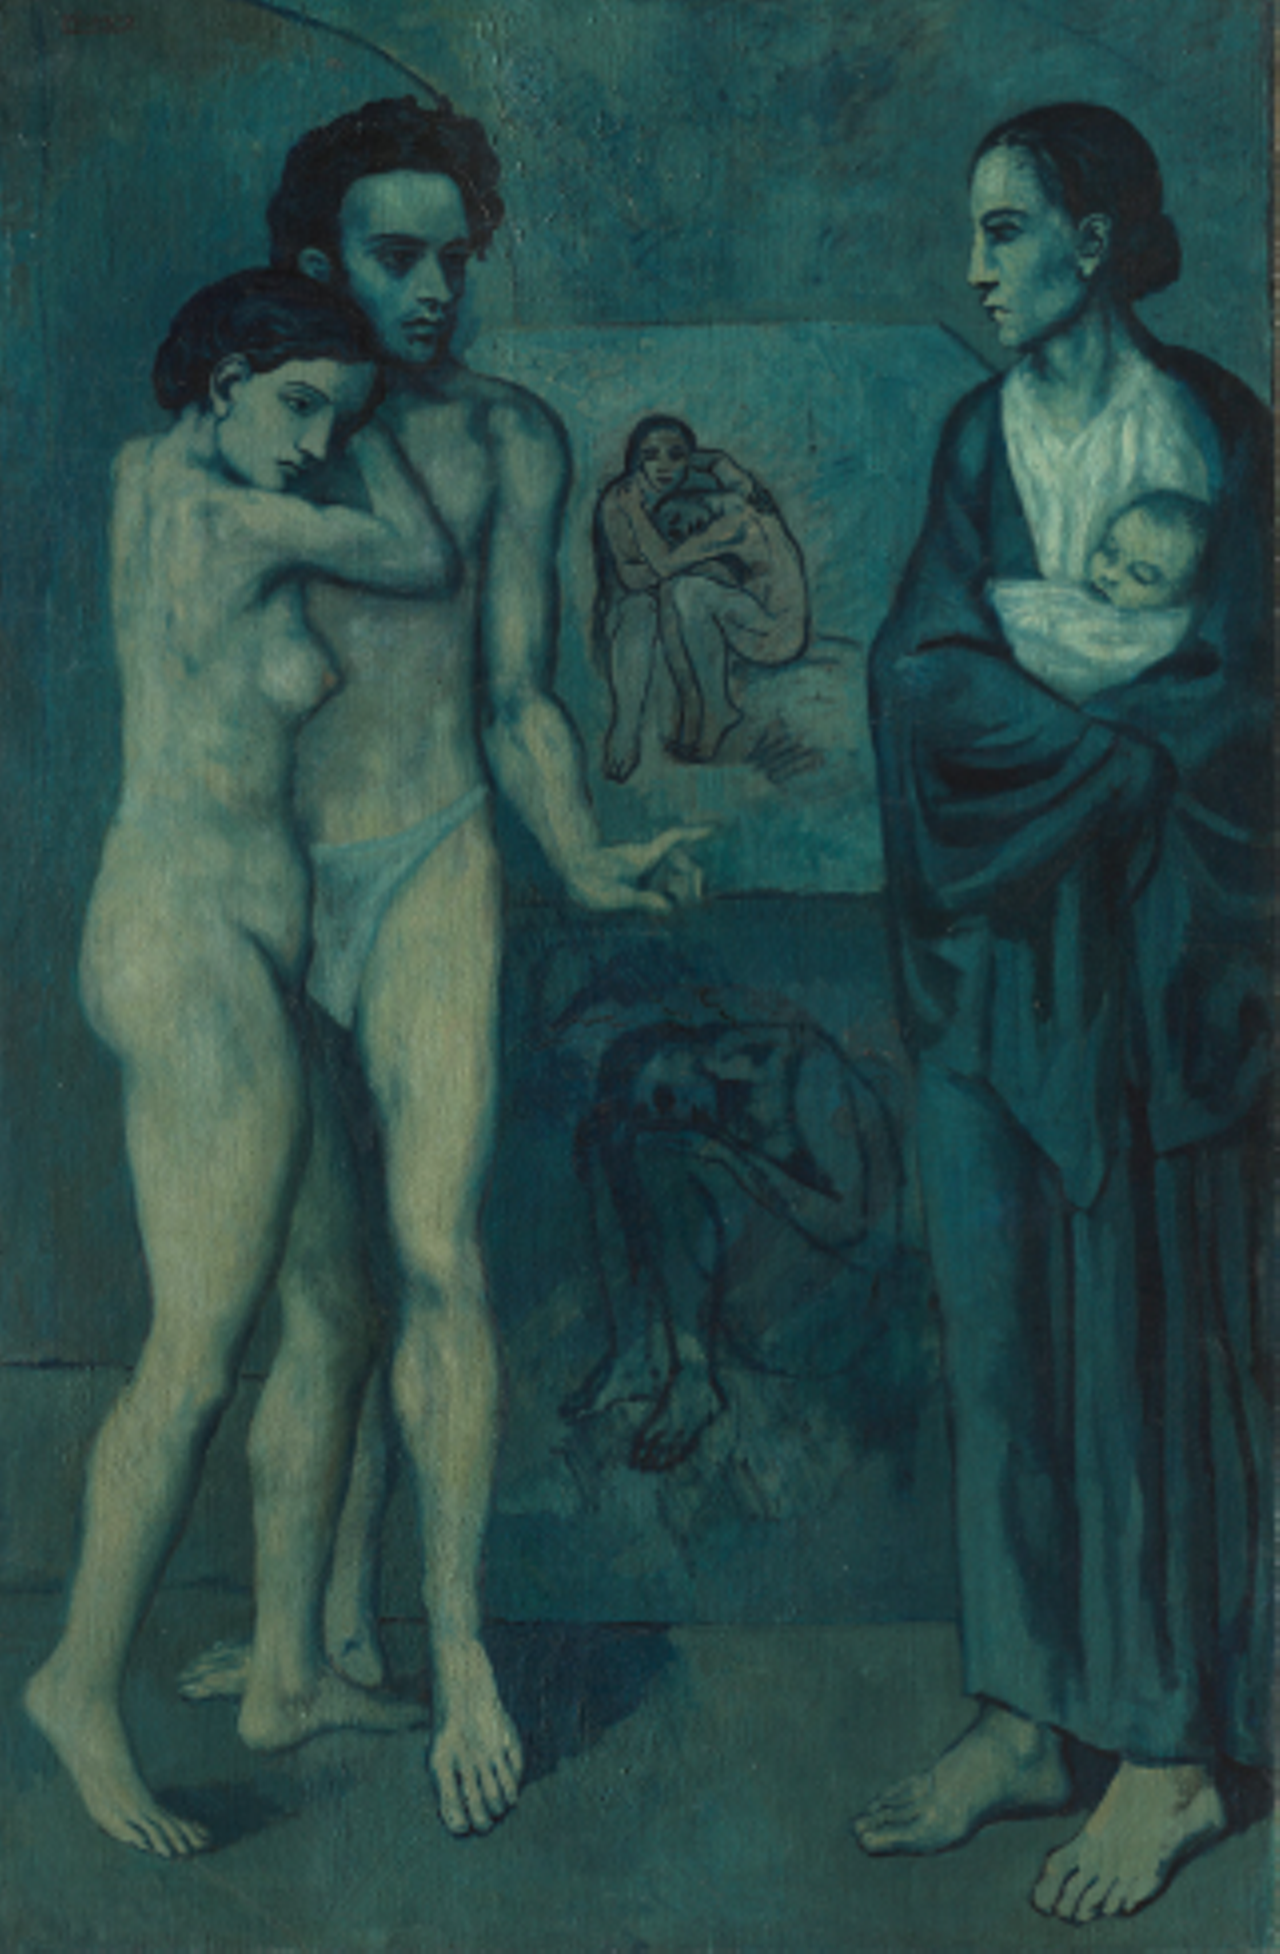 The name Picasso often evokes a picture of disorganized and just plain weird imagery, but during his Blue Period, Picasso applied strokes of realism to his usually out-there creations. In La Vie, a man stands in a Tarzanian loin cloth, seemingly giving the “oh no you didn’t” finger to the woman with a baby standing opposite him, while a naked gal drapes her arms around his shoulder… OK, it’s definitely still weird, but this is arguably one of Picasso’s most studied and important works.